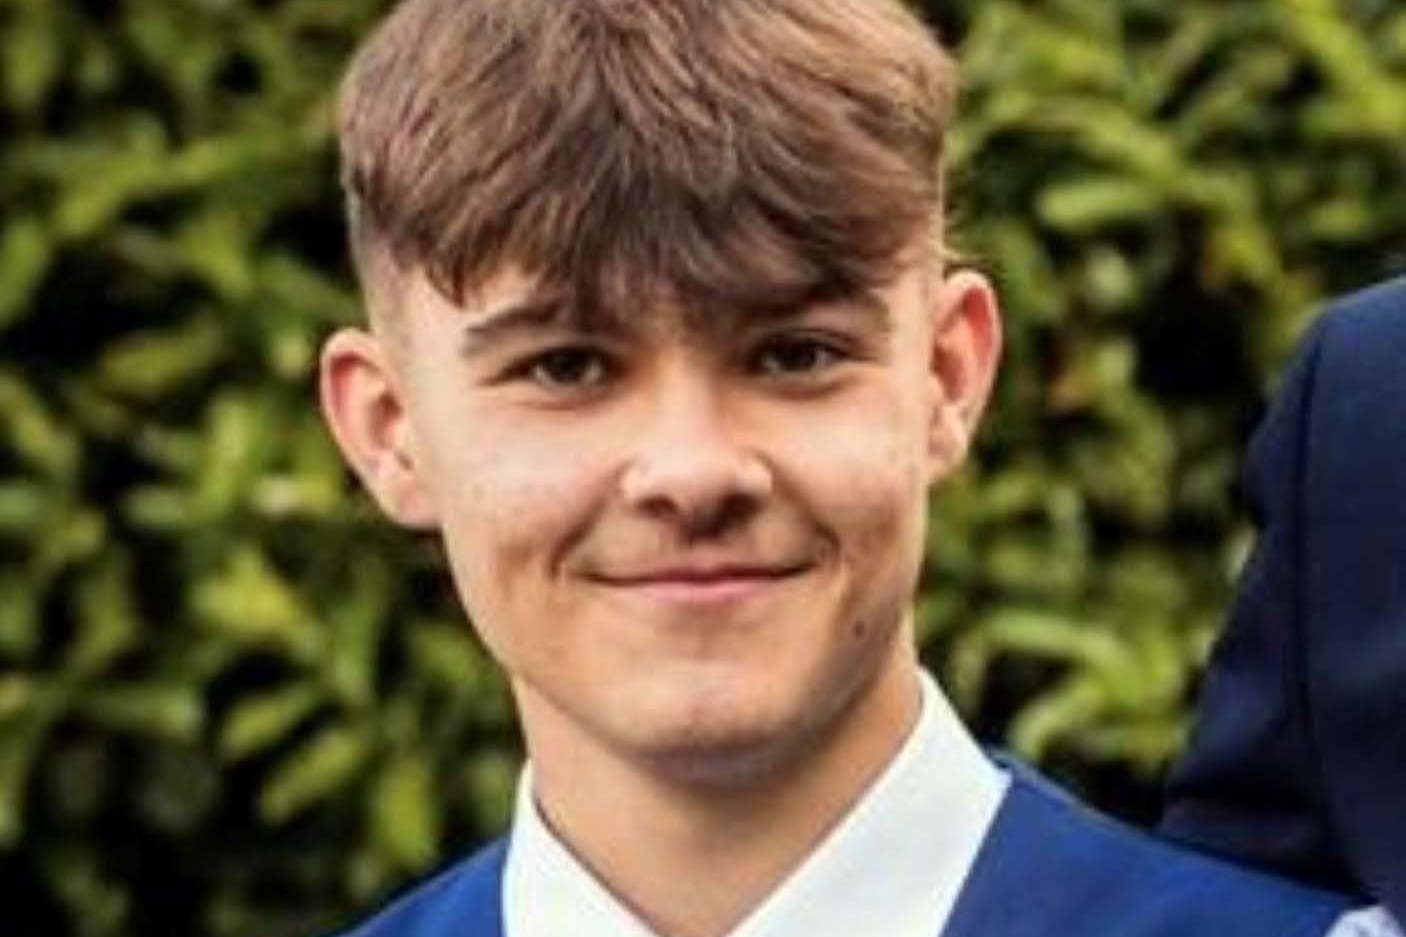 Charlie Cosser, 17, who died after being stabbed in Warnham, West Sussex, in the early hours of July 23